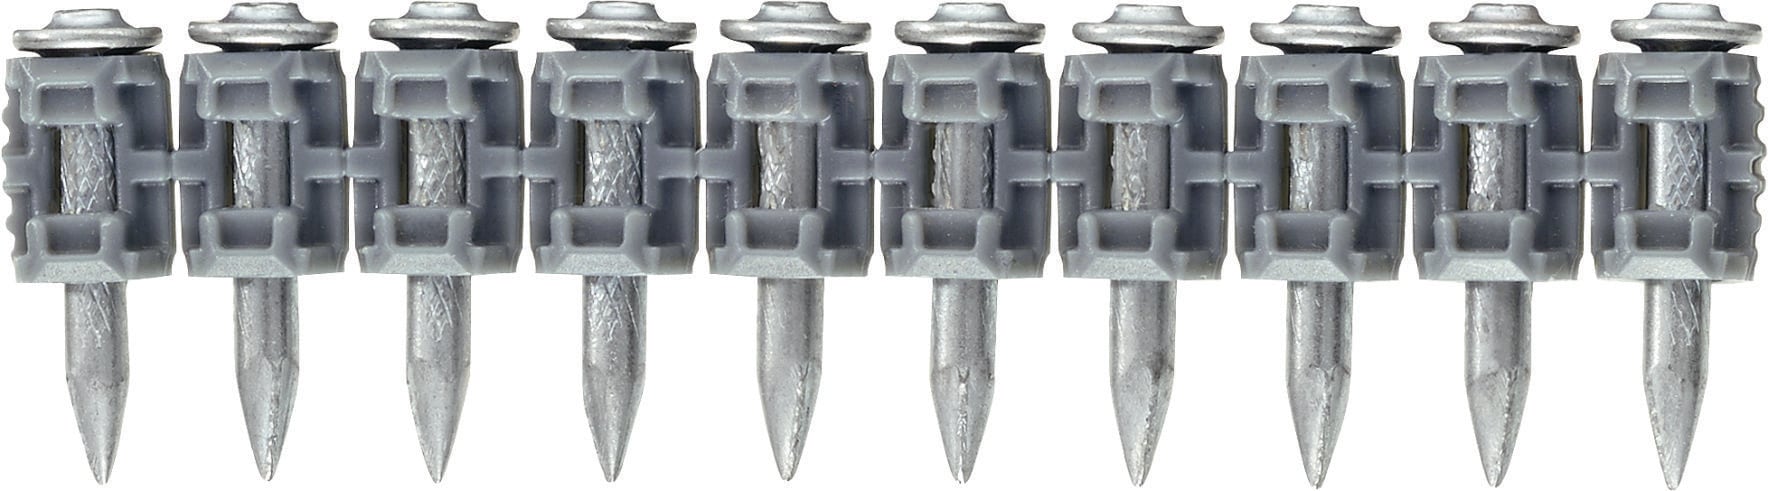 Reinforced Concrete Nails with Hilti Bx3 Grey Strip Collated Drive Pins  Fasteners Concrete Pin Galvanized Concrete Nails Gas Actuated Tools - China  Bx3 Hilti Nails and Bullet Point Step Shank